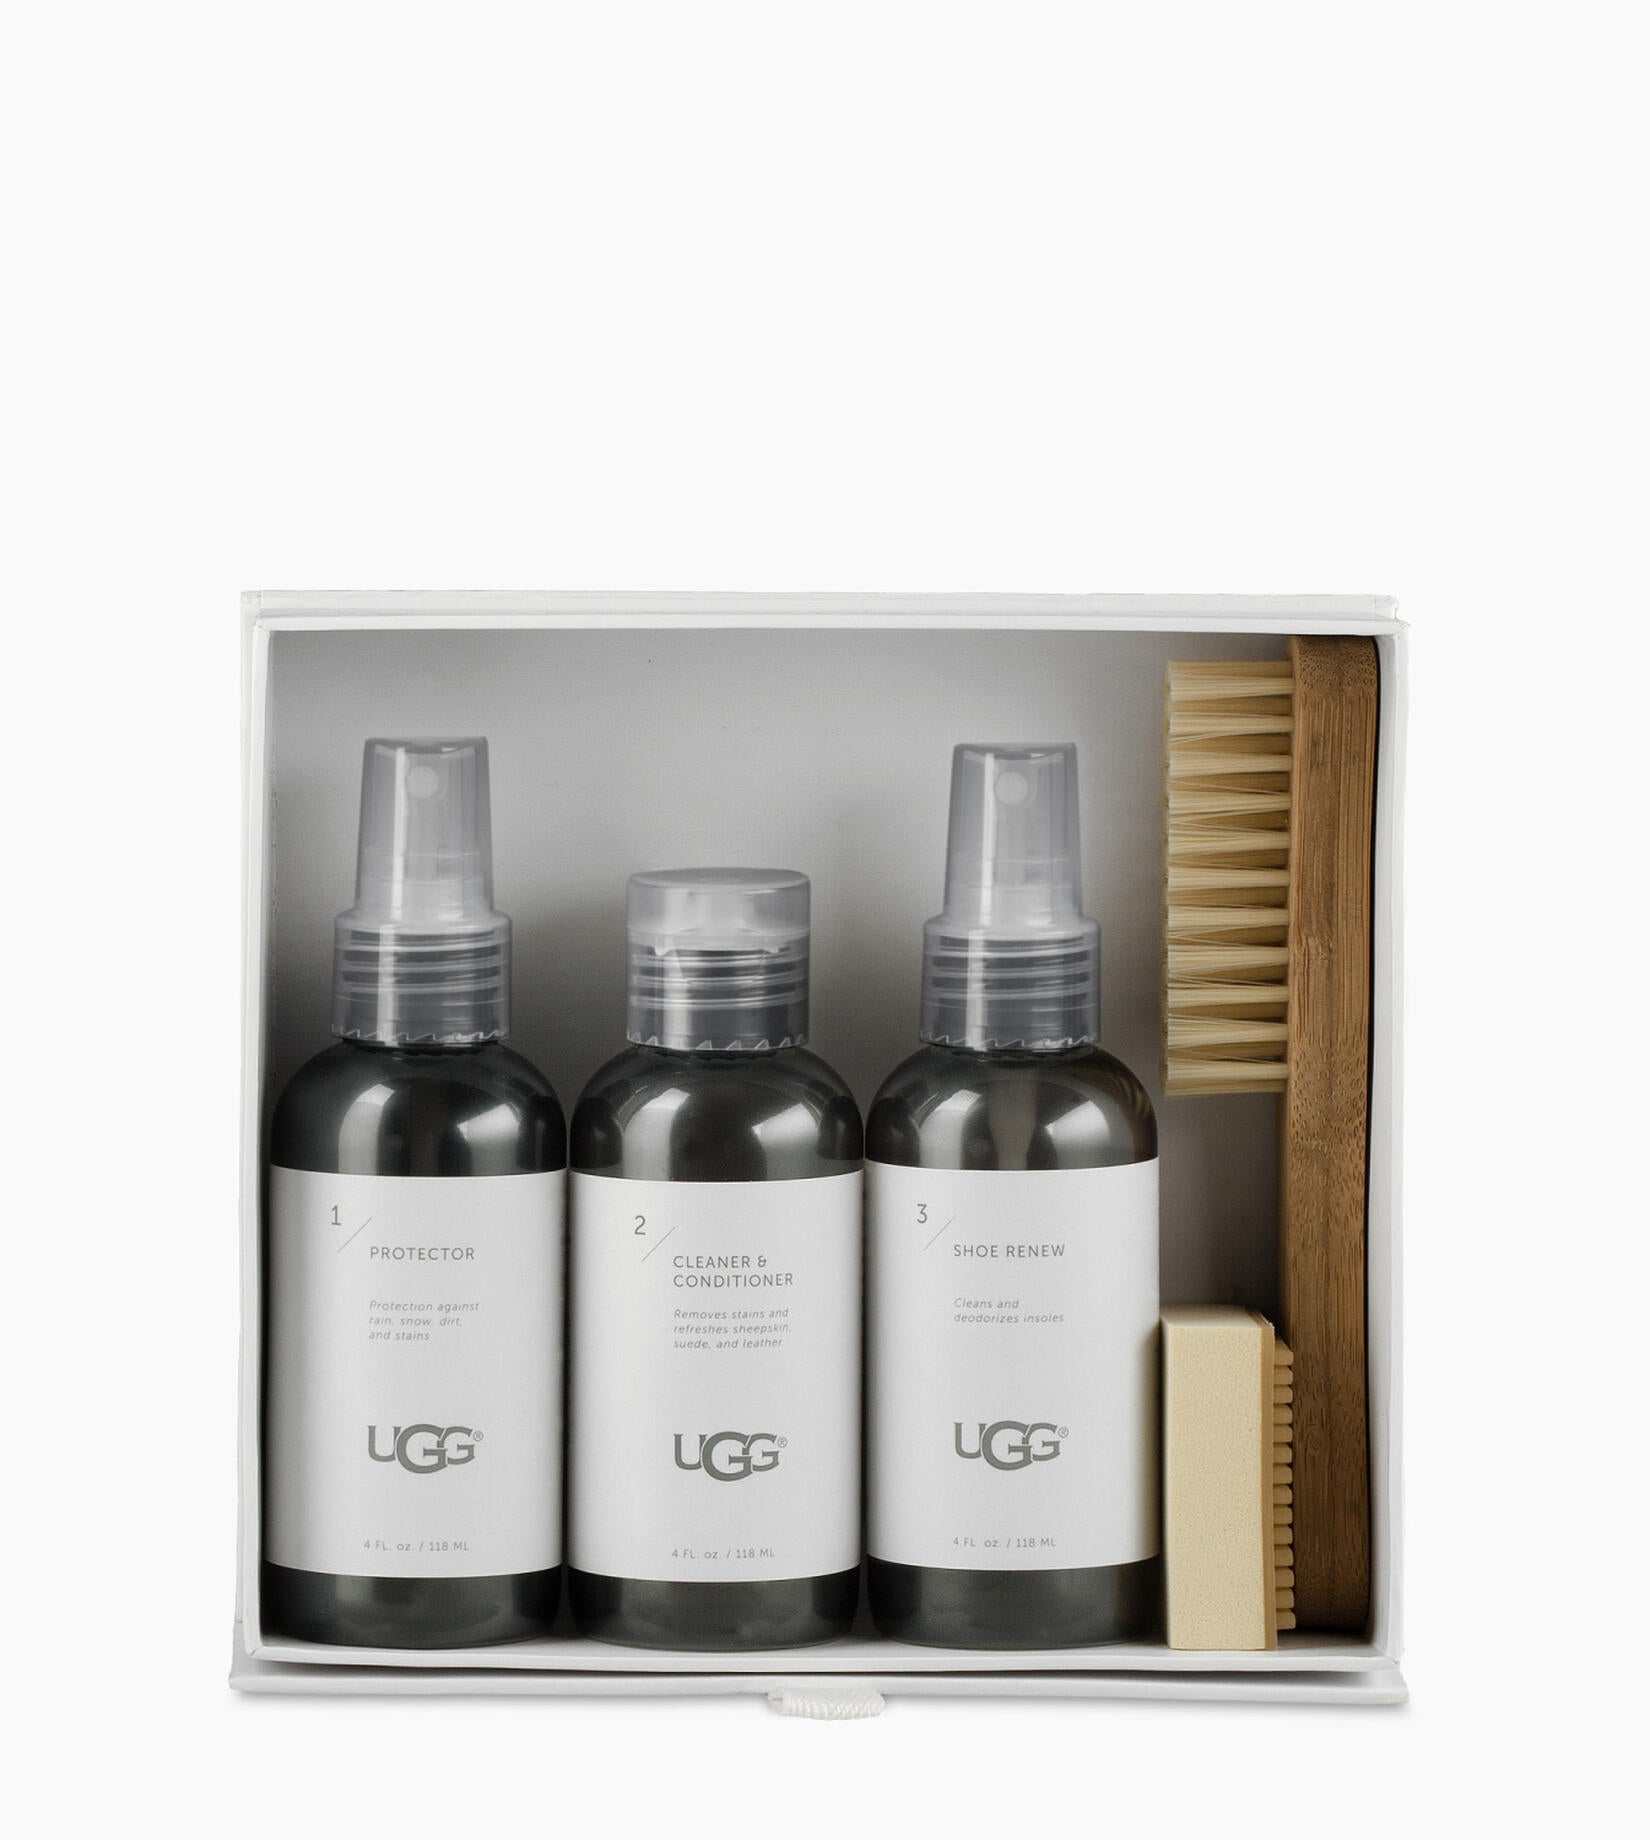 UGG Care and Cleaning Kit